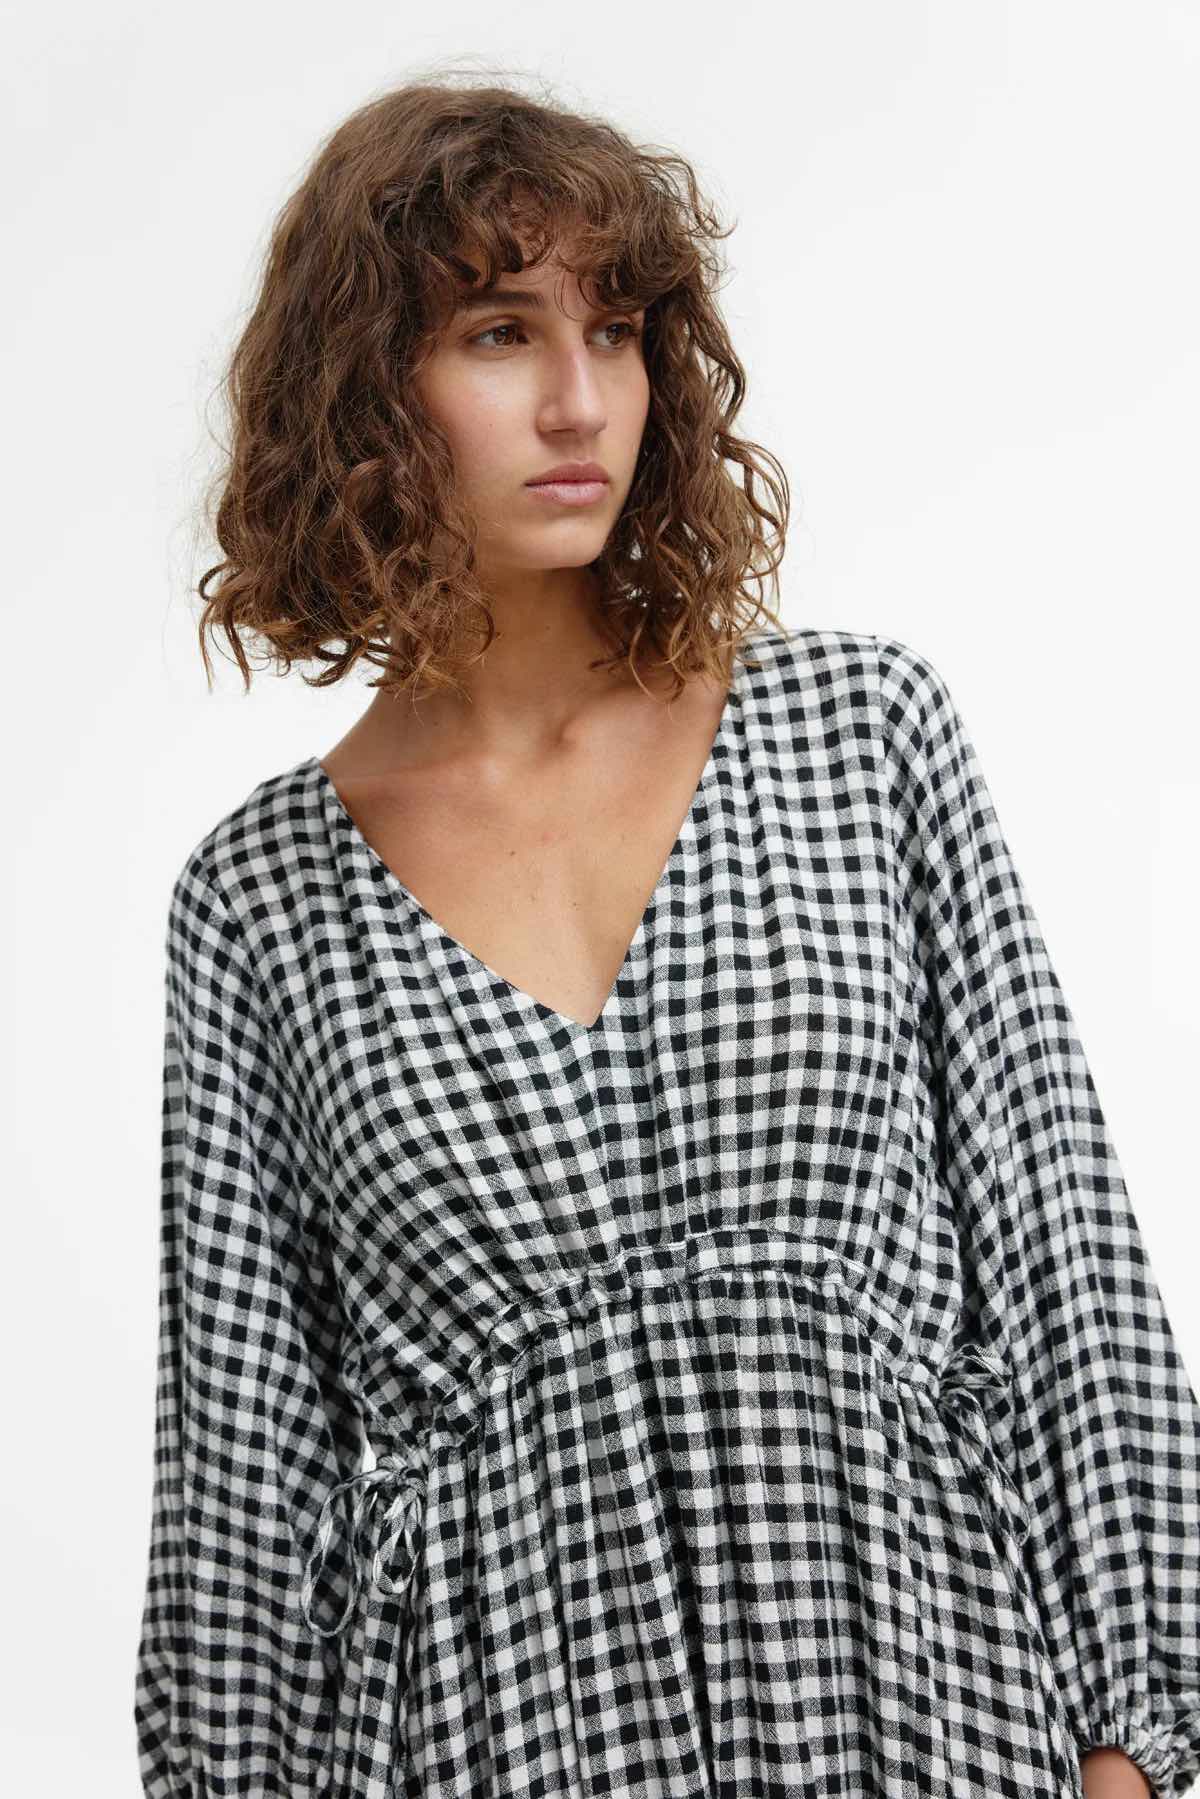 Bowie Dress - Black and Ivory Gingham